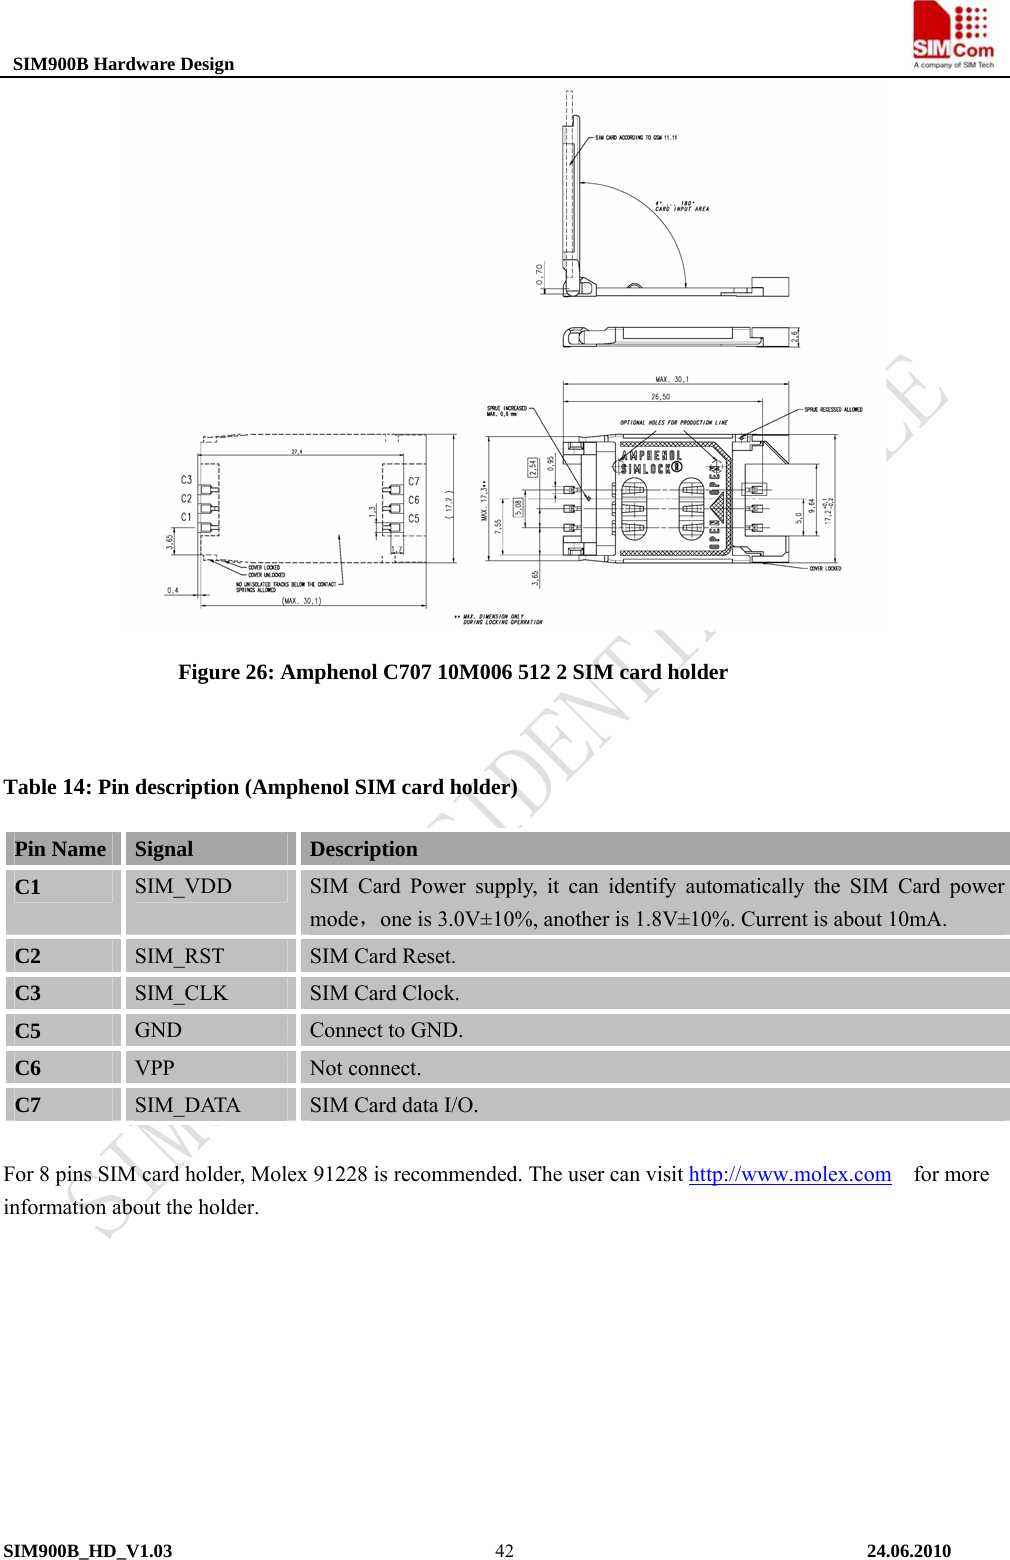  SIM900B Hardware Design                                                                           Figure 26: Amphenol C707 10M006 512 2 SIM card holder  Table 14: Pin description (Amphenol SIM card holder) Pin Name  Signal  Description C1  SIM_VDD  SIM Card Power supply, it can identify automatically the SIM Card power mode，one is 3.0V±10%, another is 1.8V±10%. Current is about 10mA. C2  SIM_RST  SIM Card Reset. C3  SIM_CLK  SIM Card Clock. C5  GND  Connect to GND. C6  VPP  Not connect. C7  SIM_DATA  SIM Card data I/O.  For 8 pins SIM card holder, Molex 91228 is recommended. The user can visit http://www.molex.com  for more information about the holder.  SIM900B_HD_V1.03                                                                          24.06.2010  42